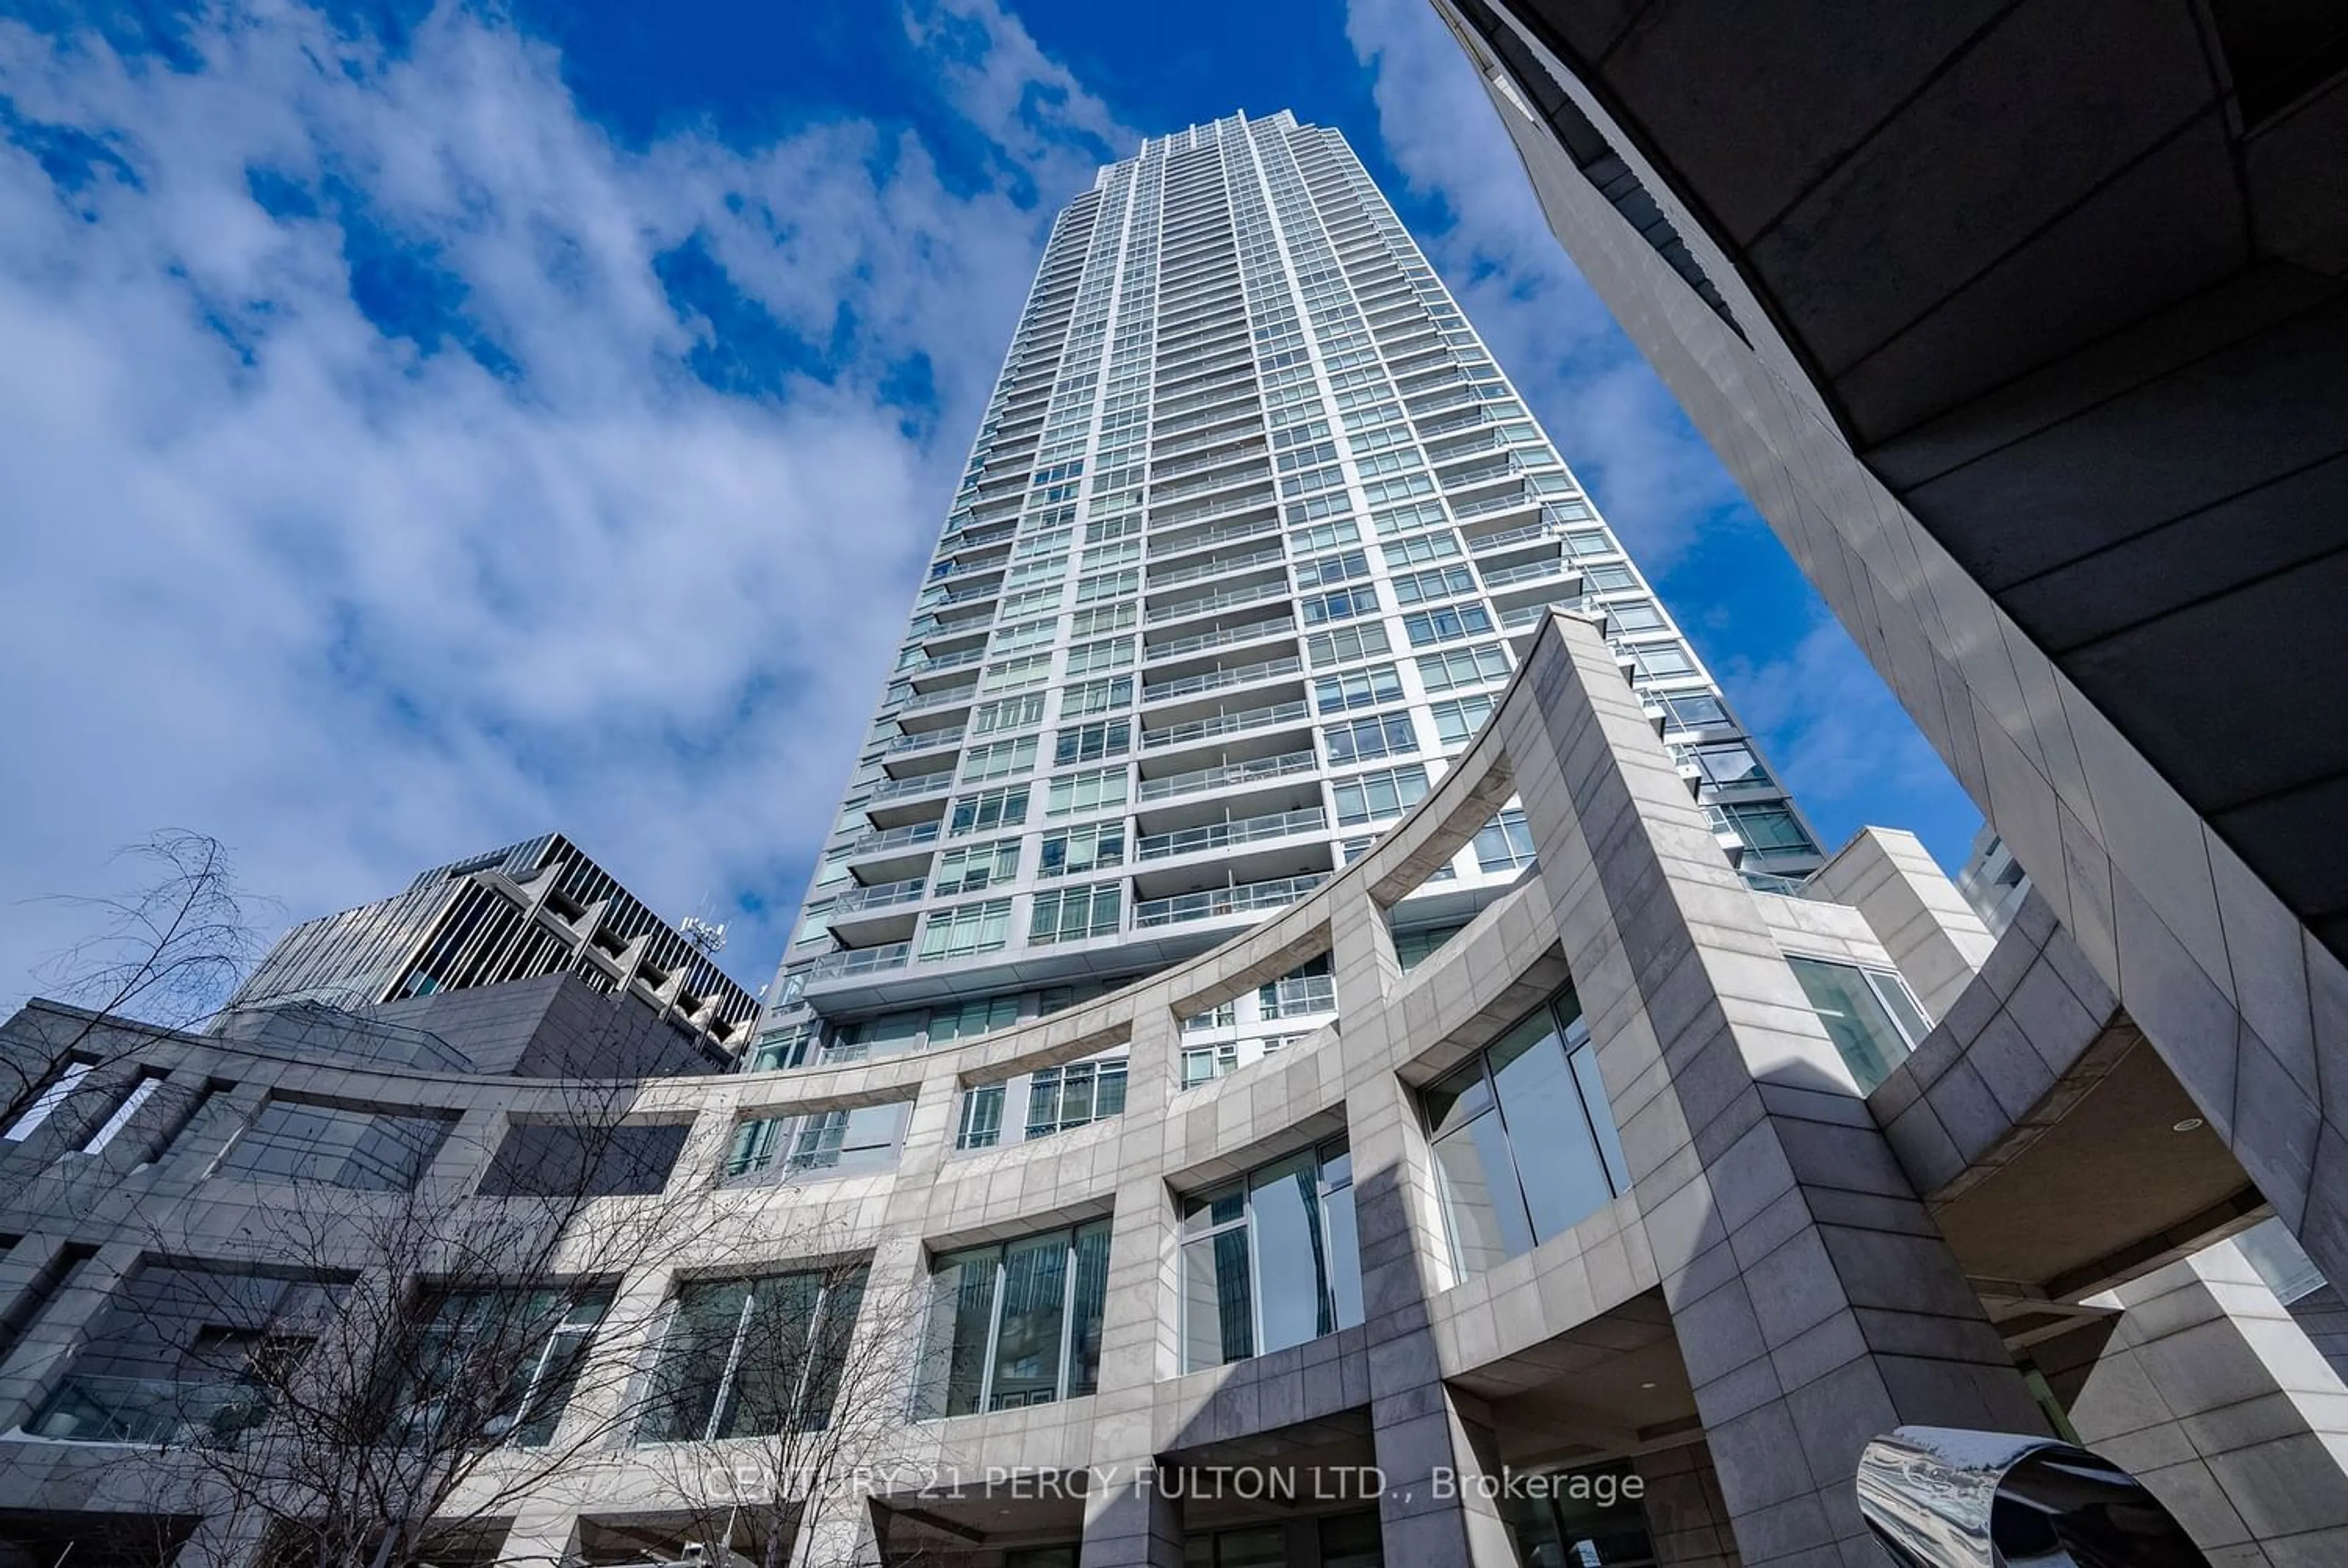 A pic from exterior of the house or condo for 2191 Yonge St #706, Toronto Ontario M4S 3H8